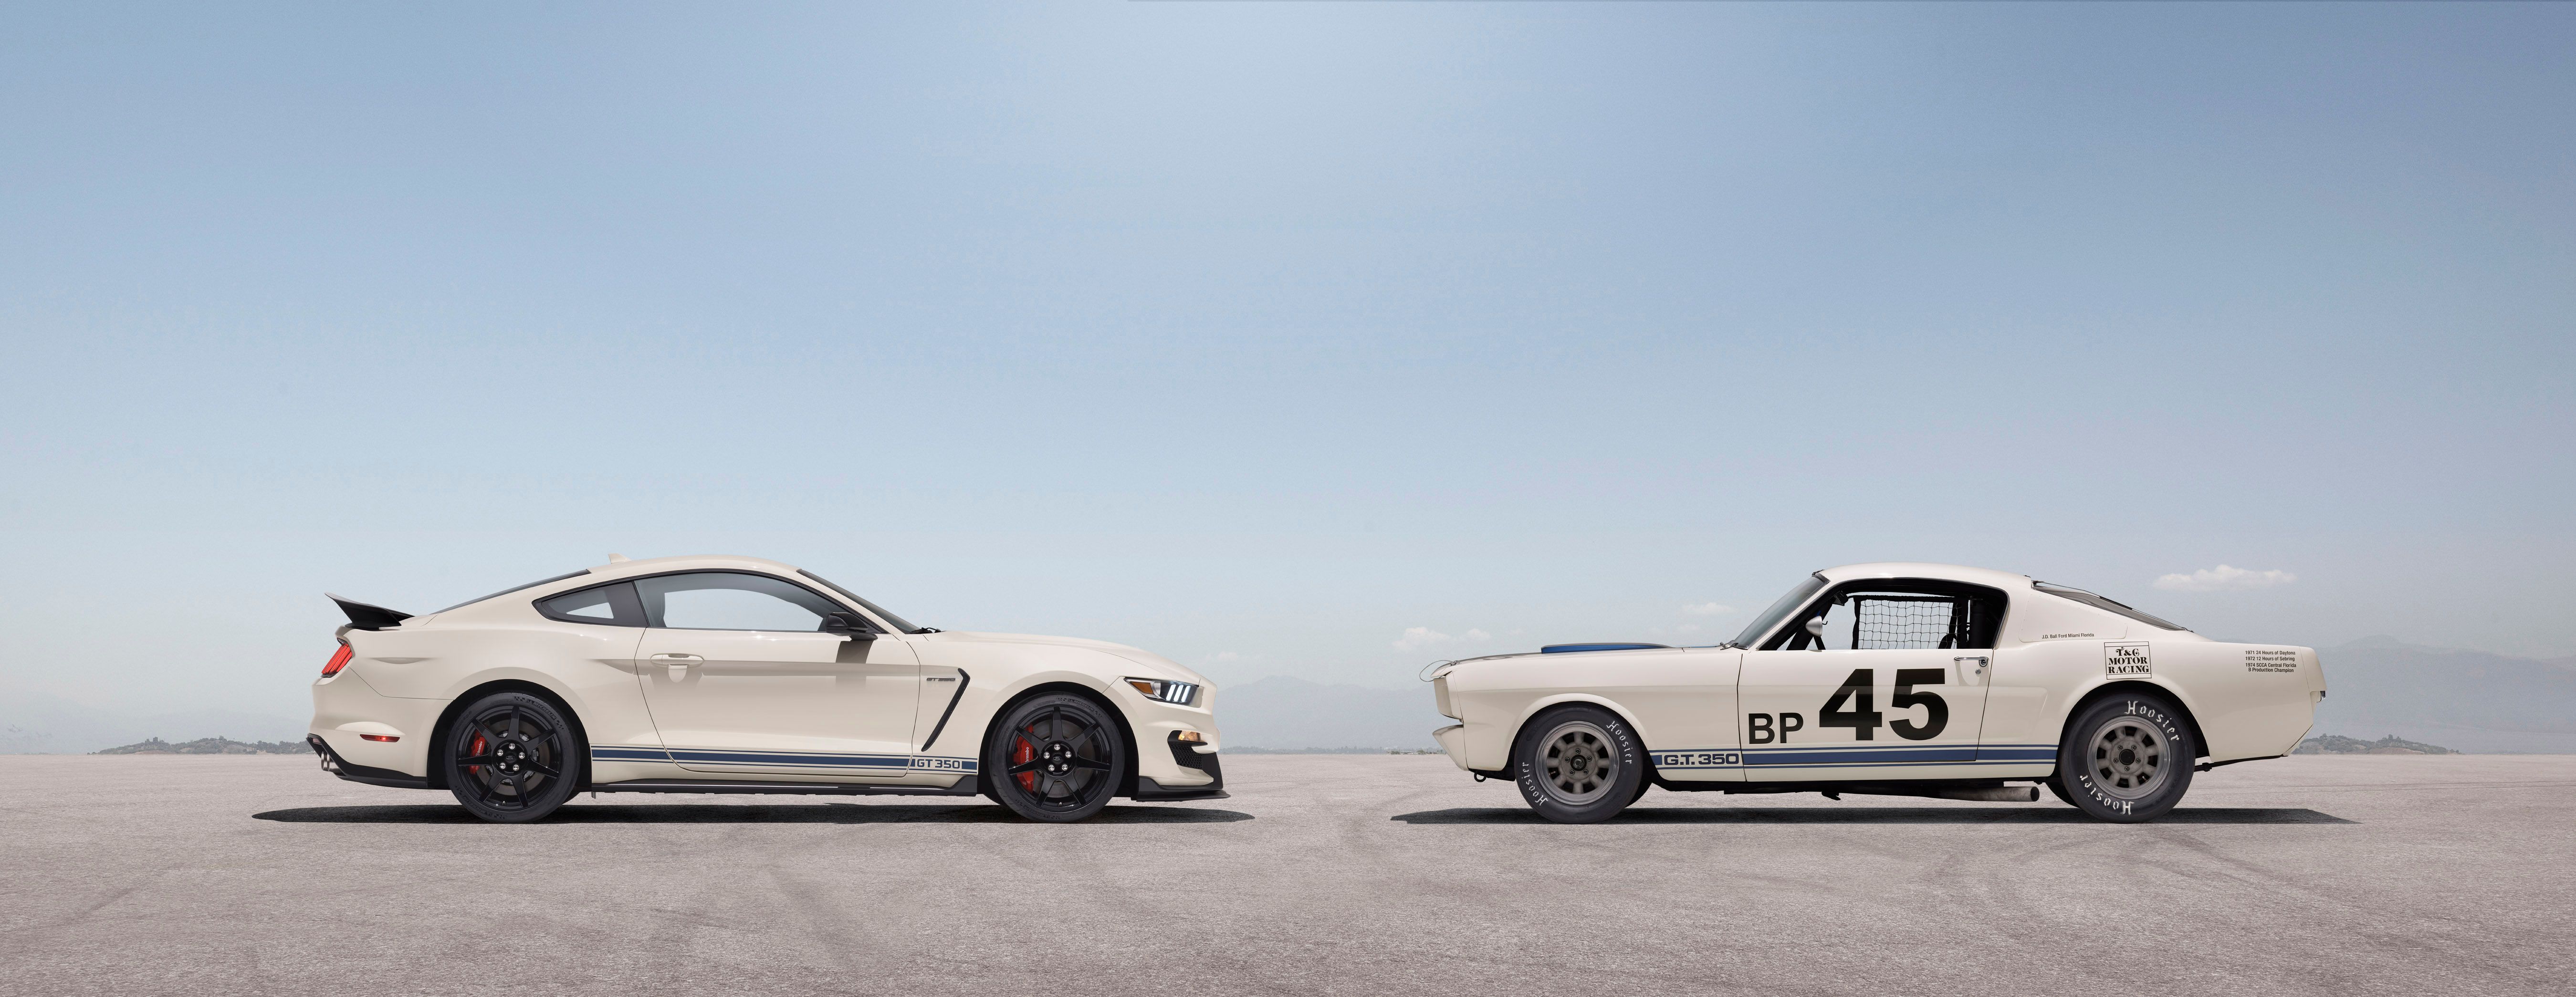 Shelby GT350 old and new.